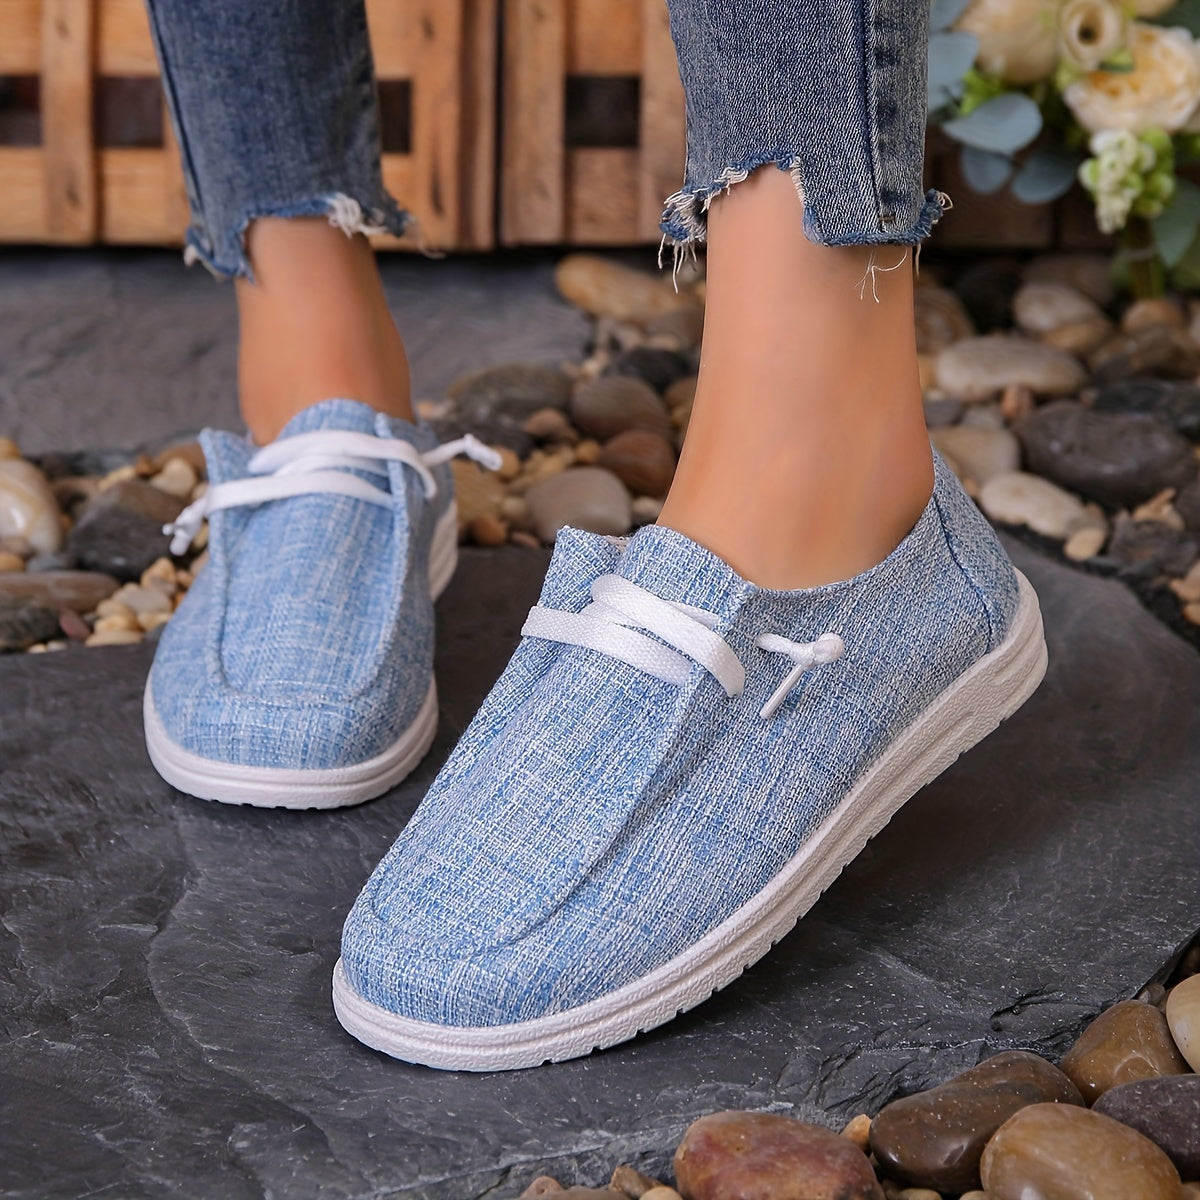 Solid Color Canvas Shoes, Casual Lace Up Walking Sneakers